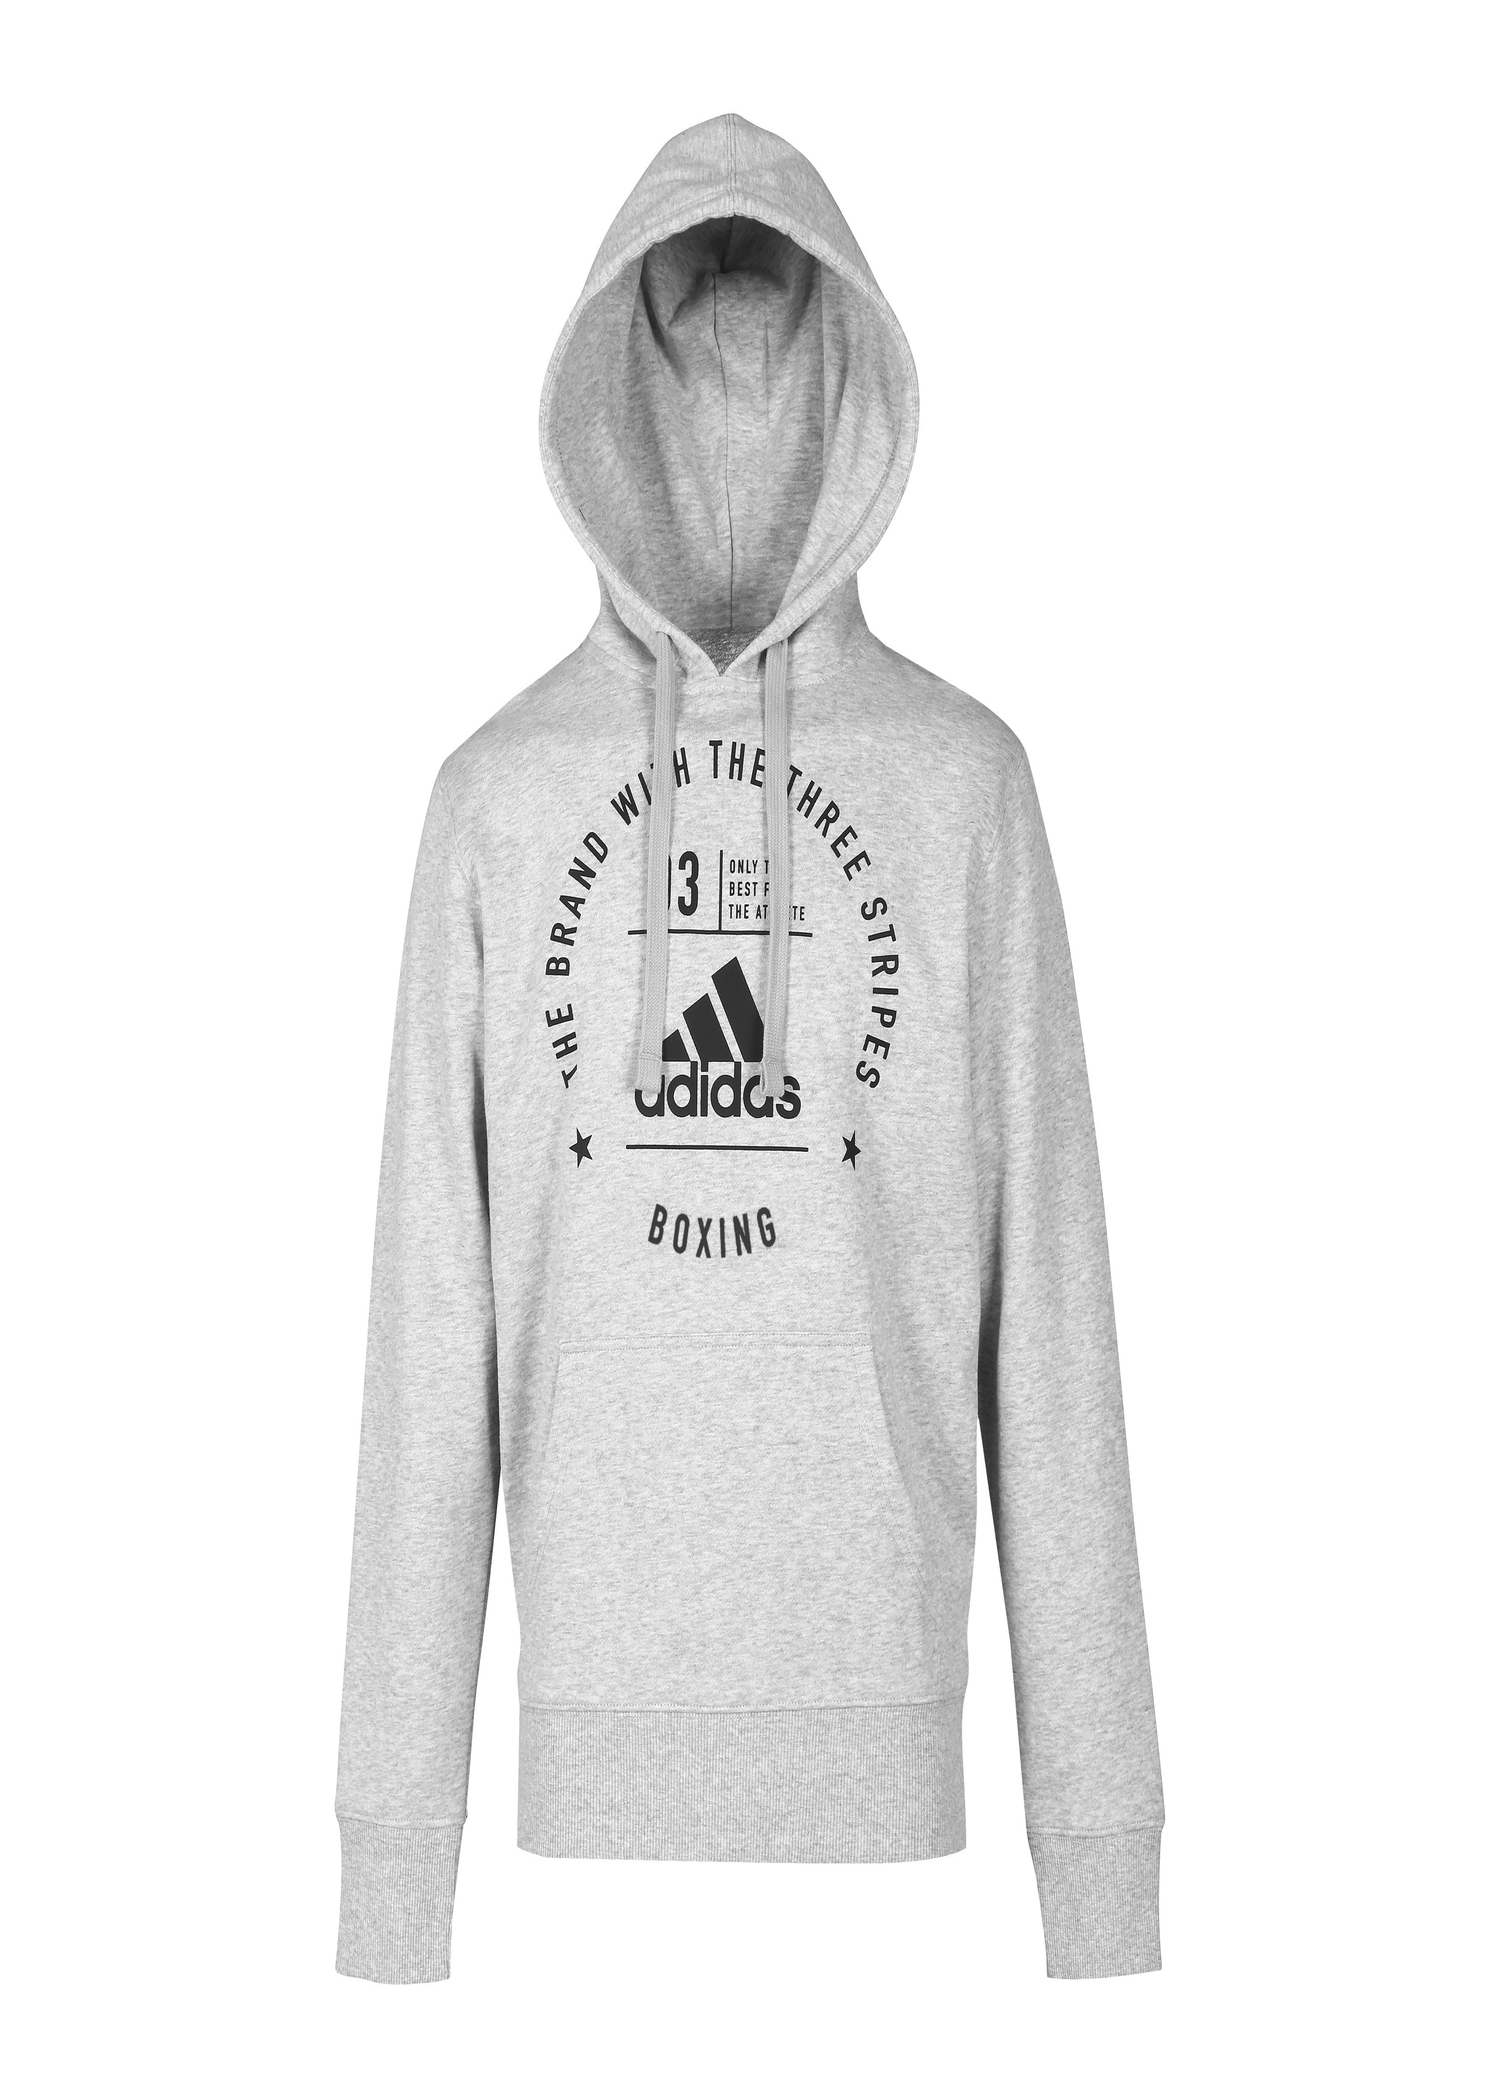 Adidas Boxing Community Hoodie- for Gym, Woman, FightersShop for Unisex Man, Work — 